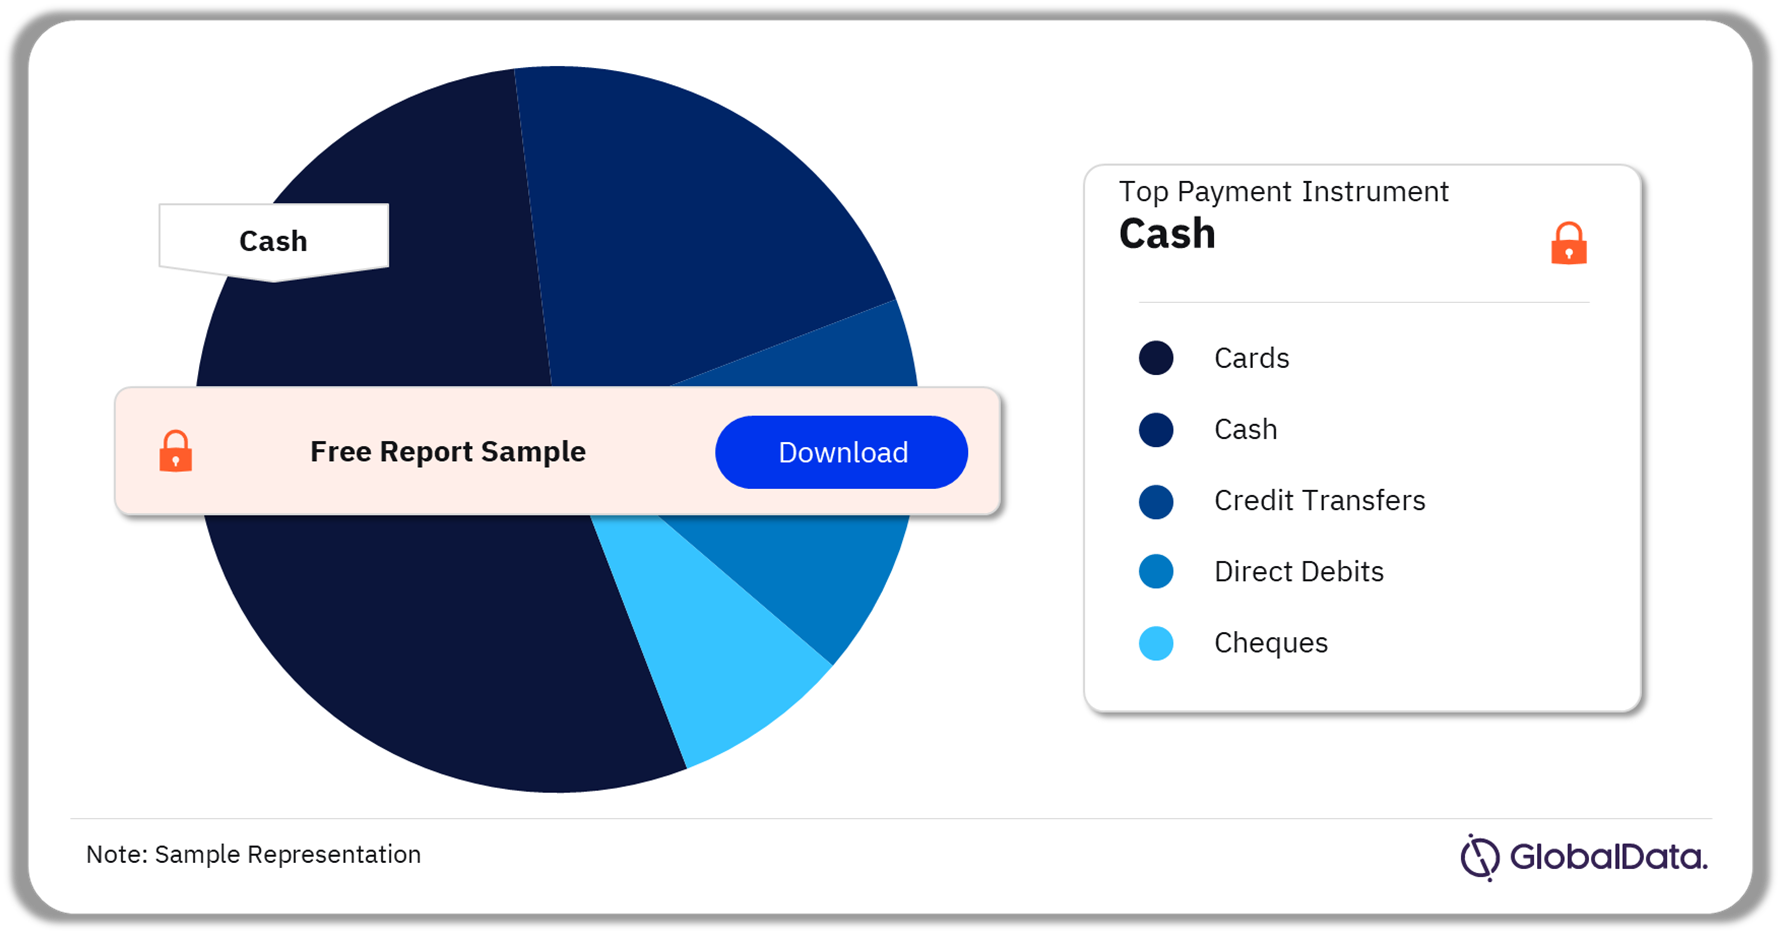 Germany Cards and Payments Market Analysis by Payment Instruments (Volume Terms), 2023 (%)